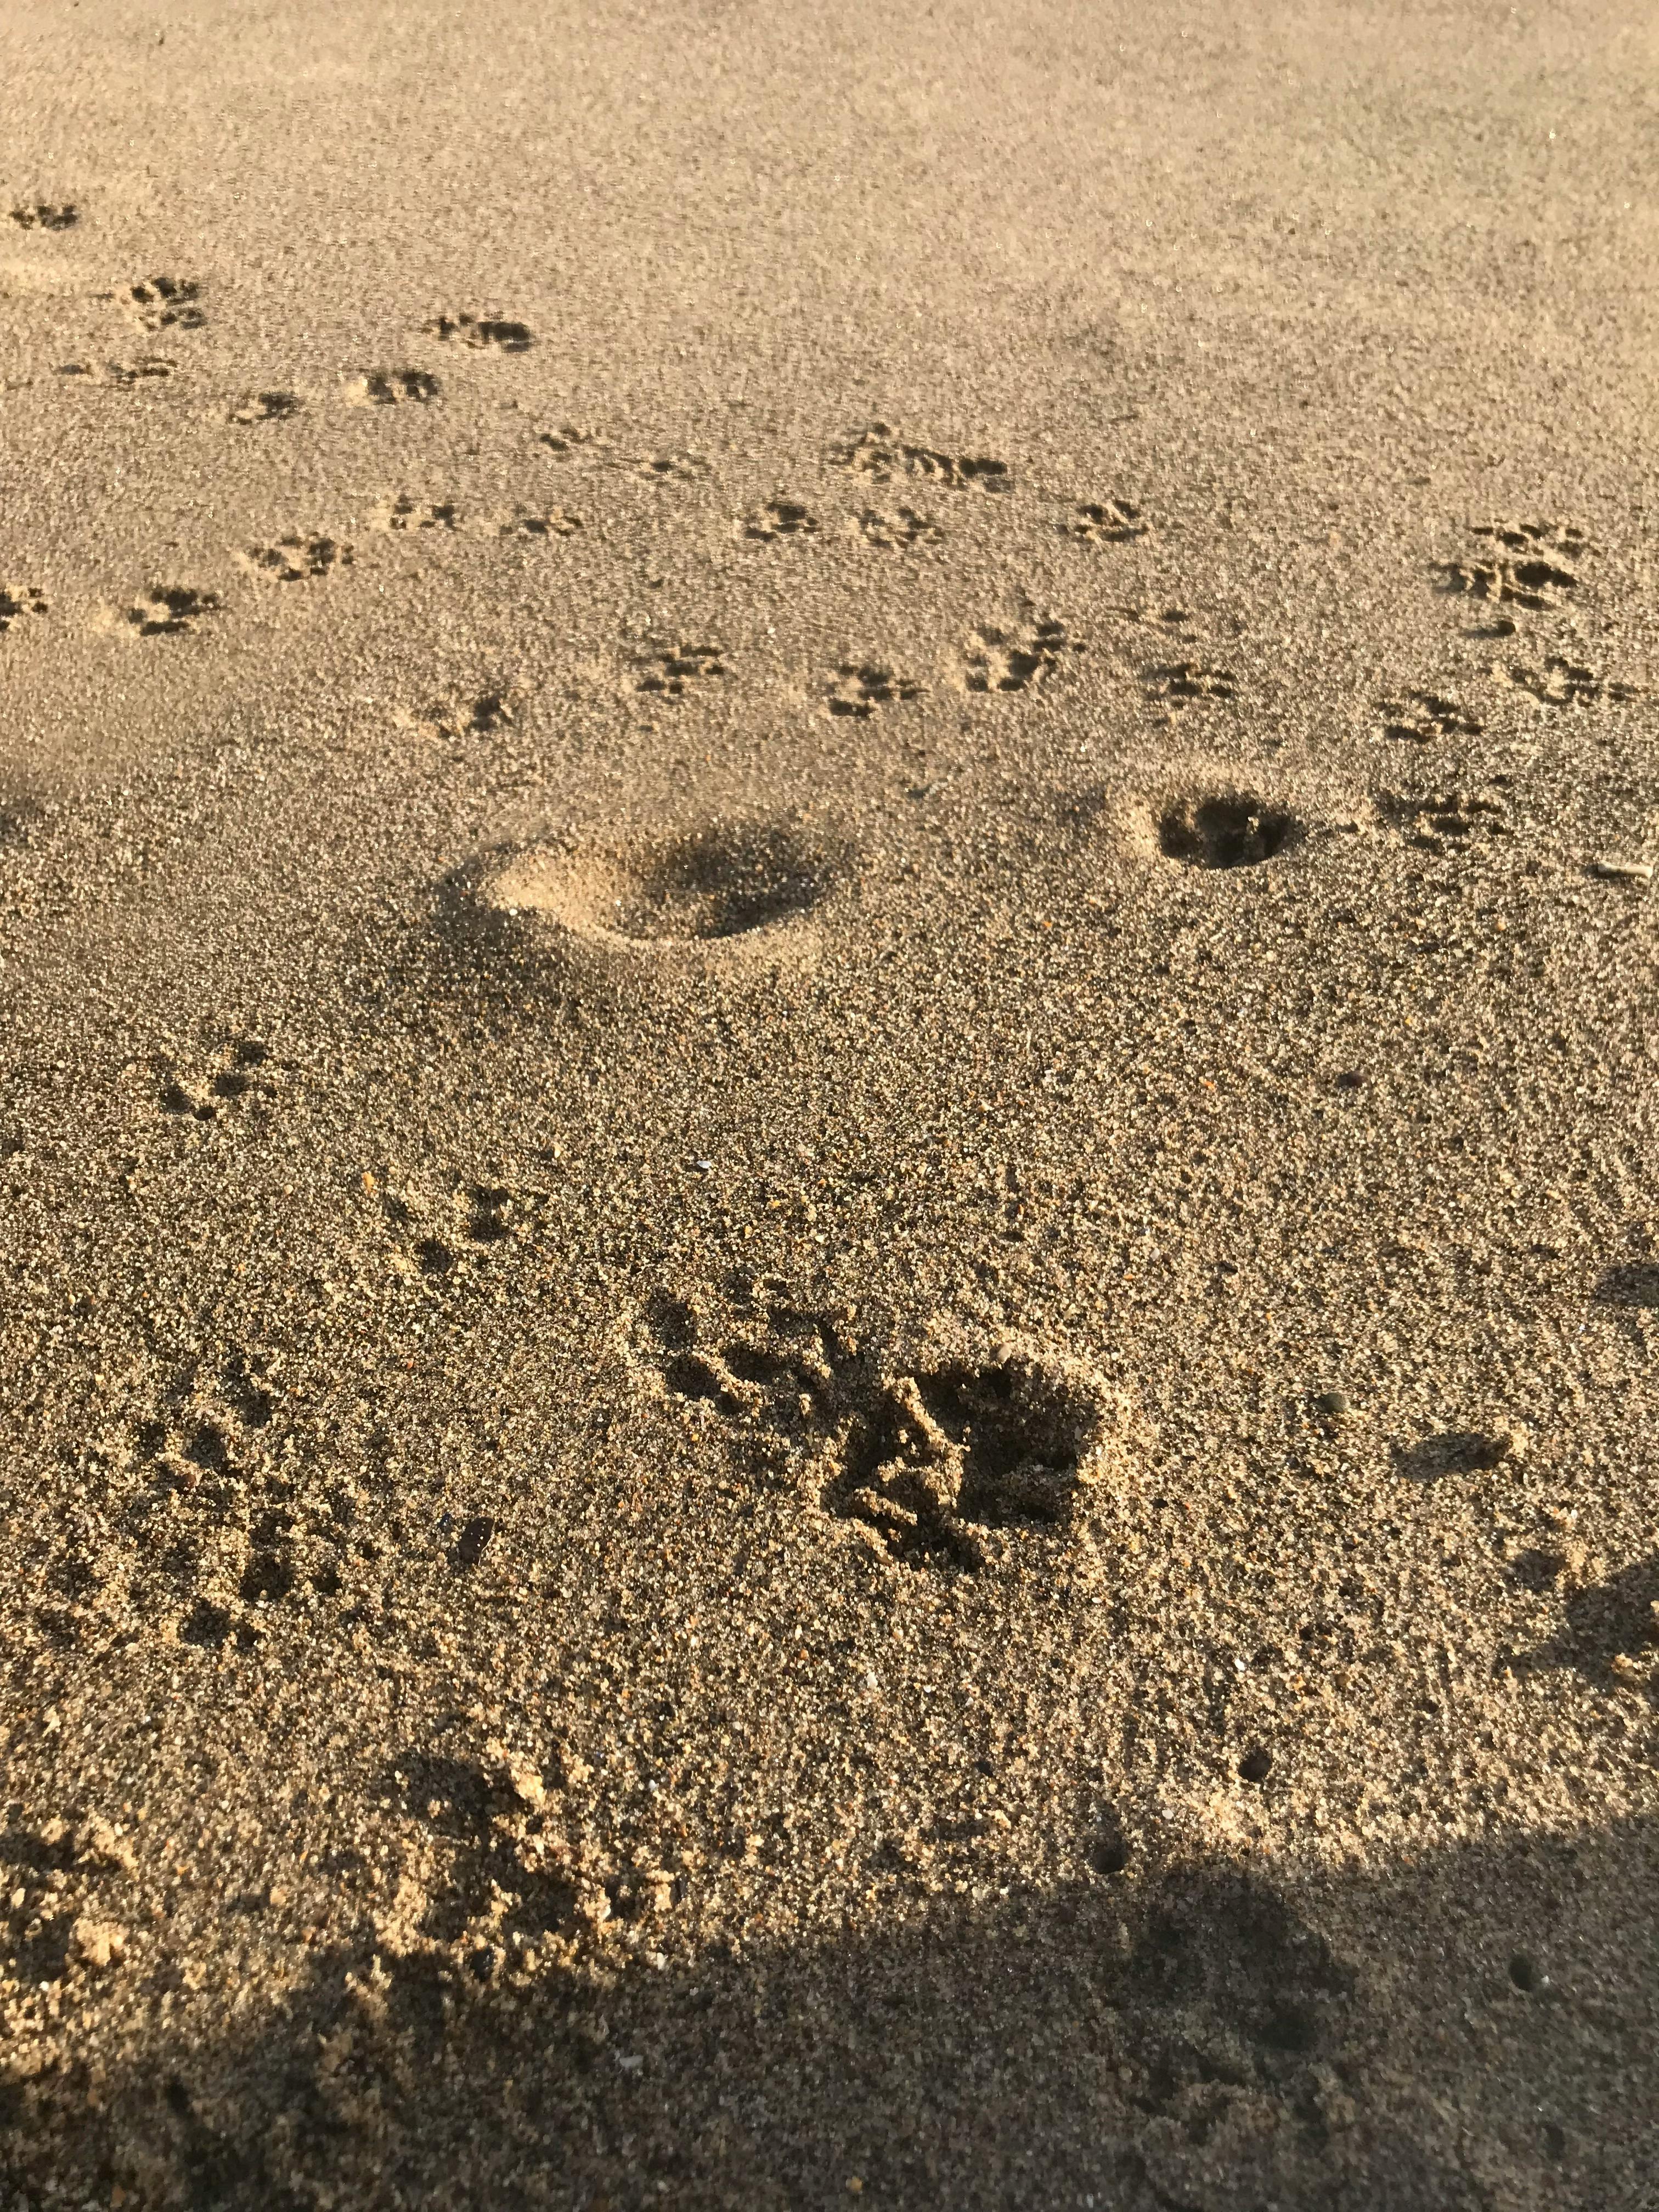 Free stock photo of beach, paw prints, Paw prints in the sand